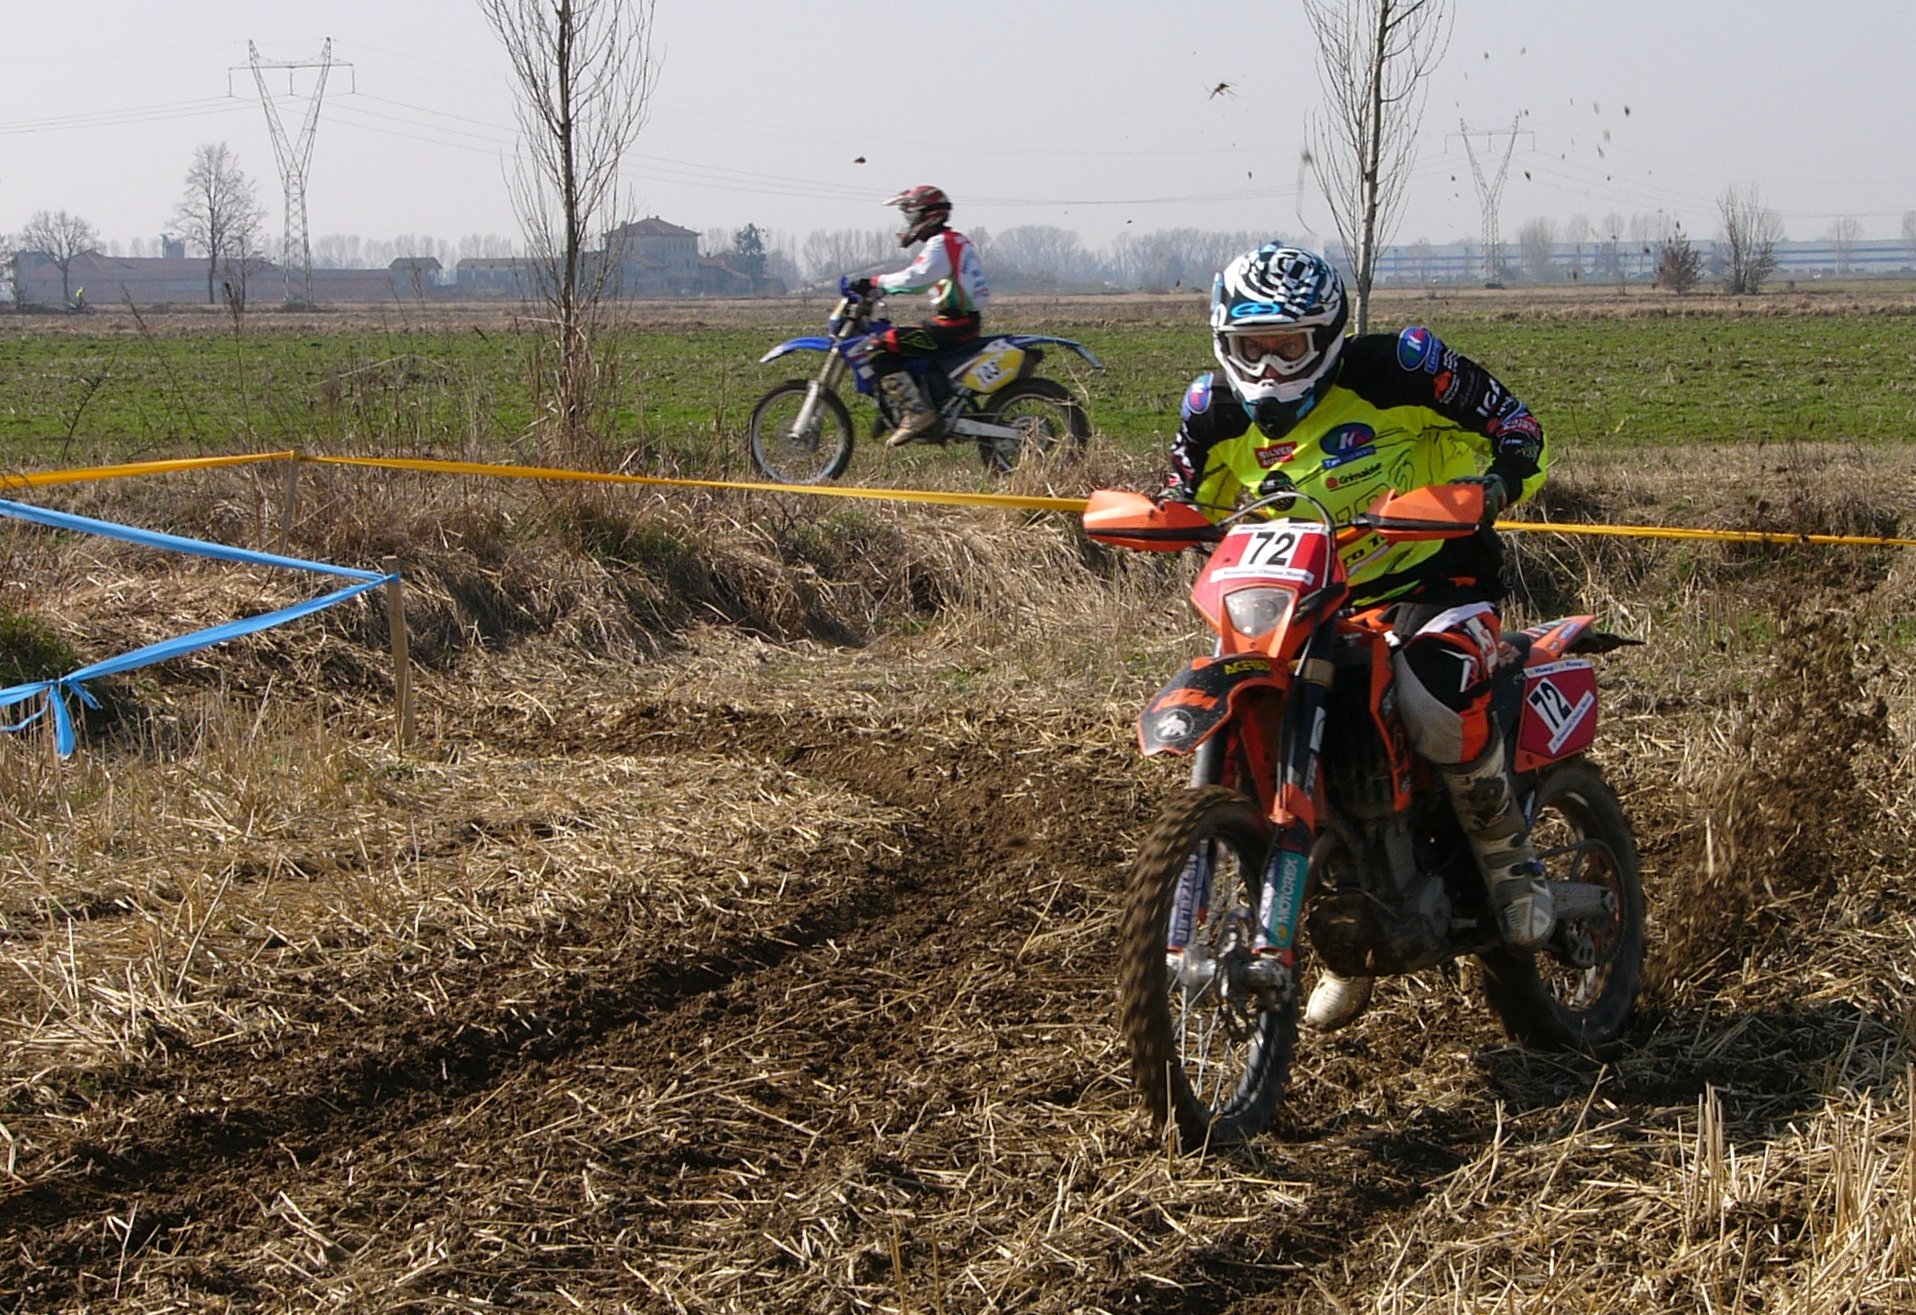 two people on motorcycles riding in the dirt